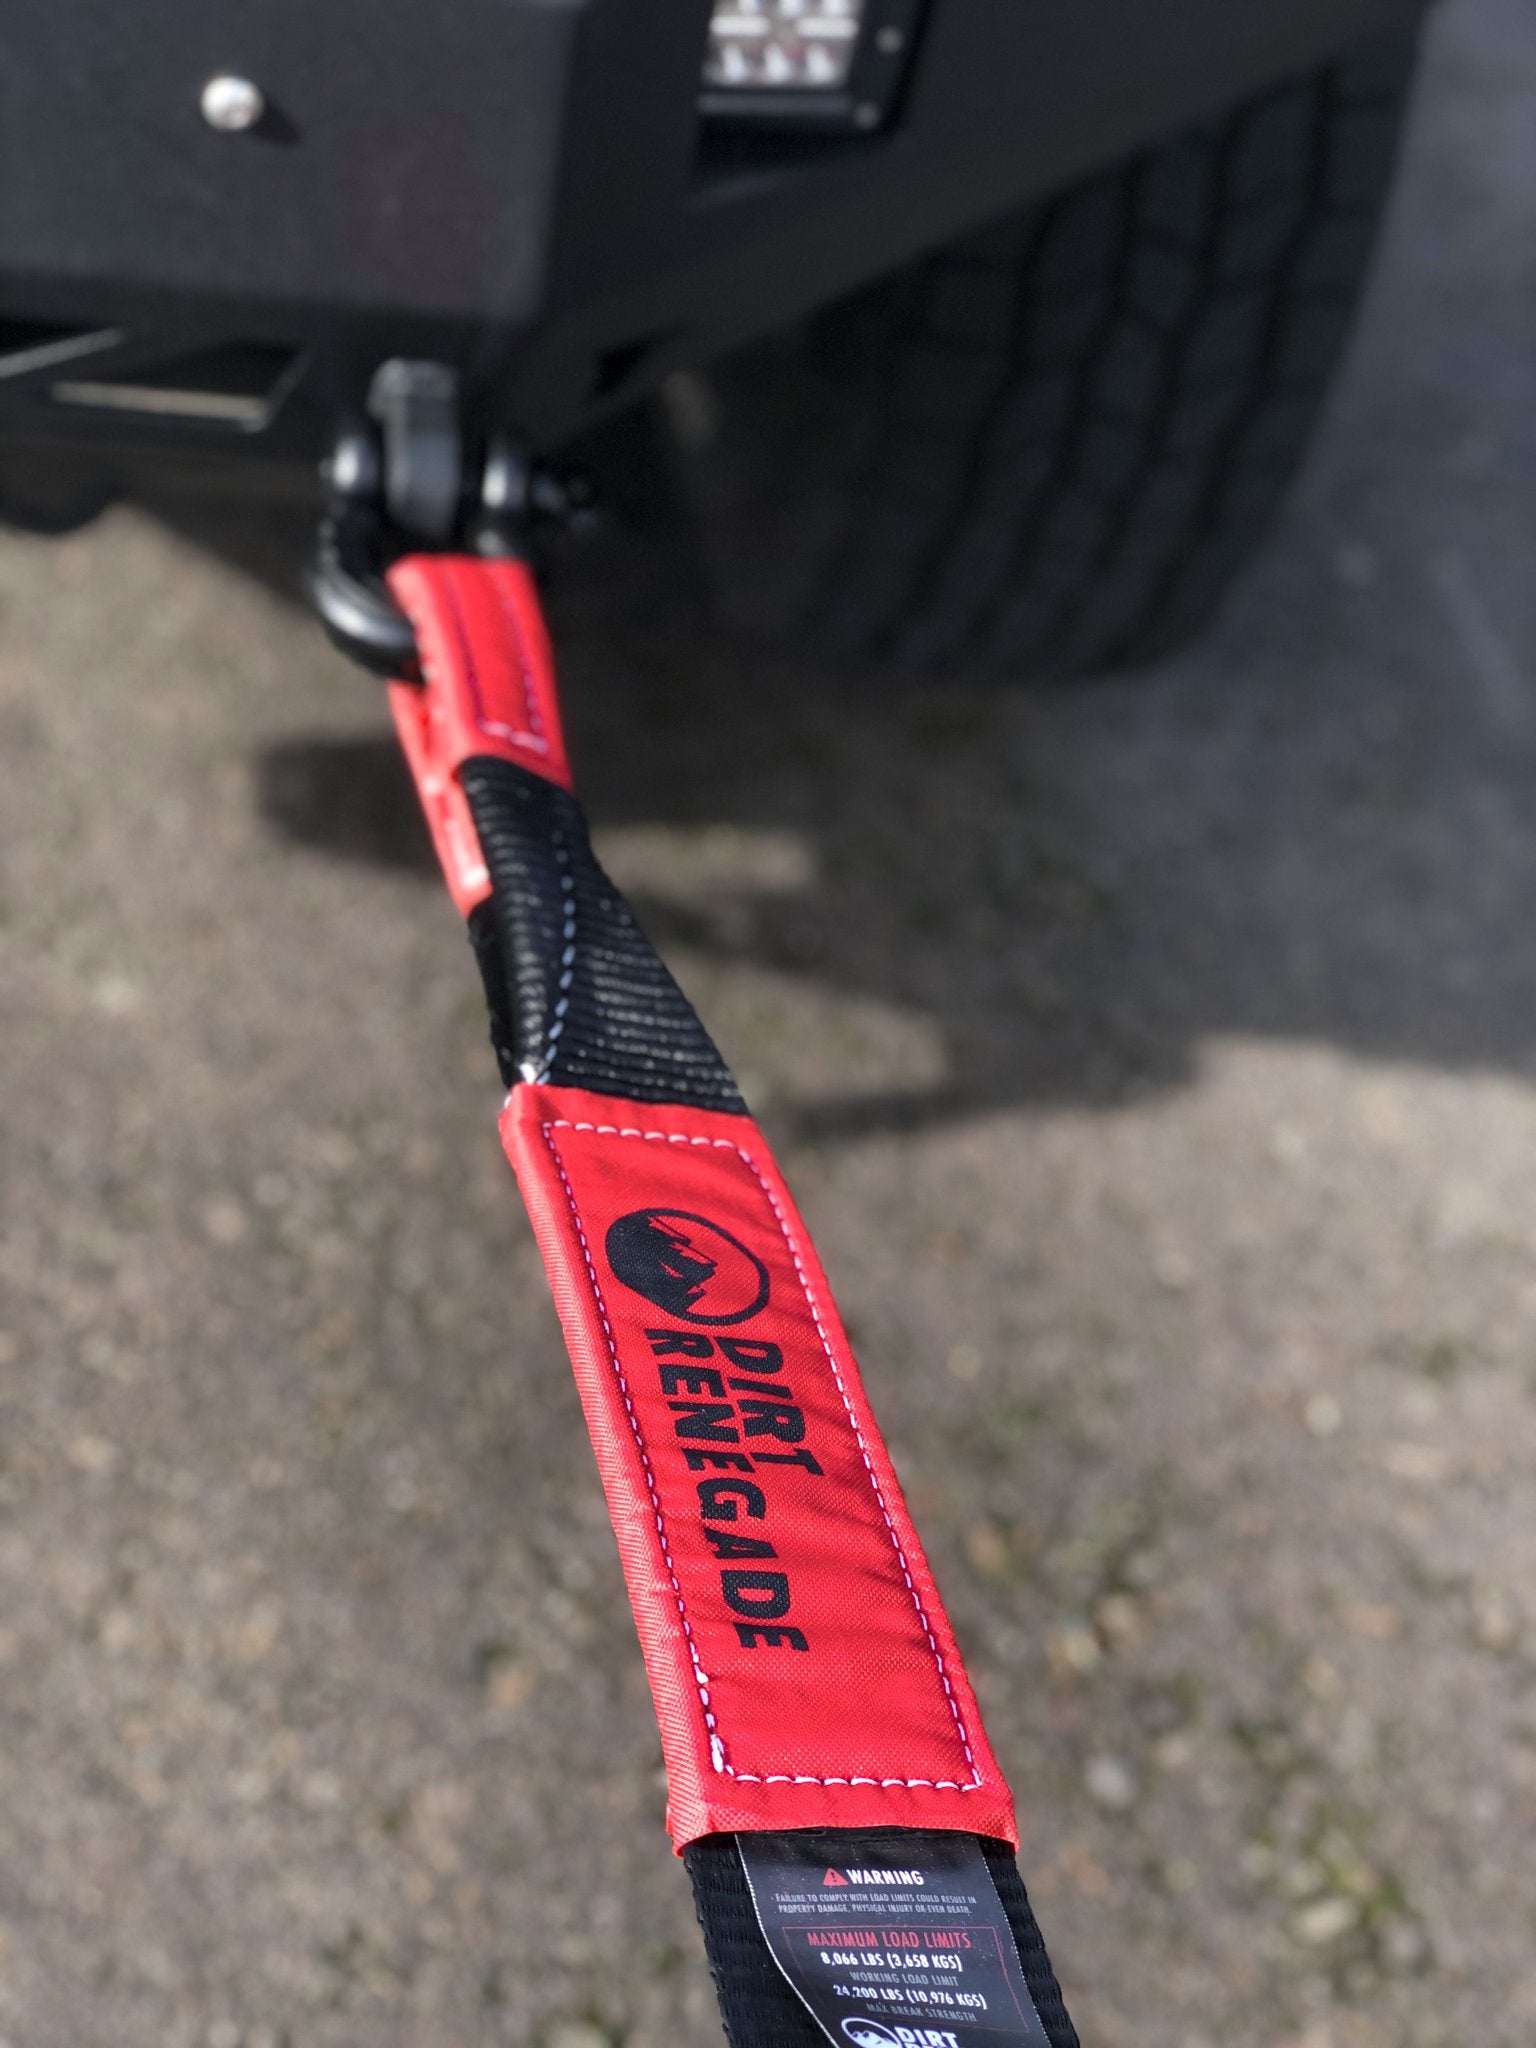 Best Recovery Kit - 30ft Tow Strap & Shackle Kit - Off Road